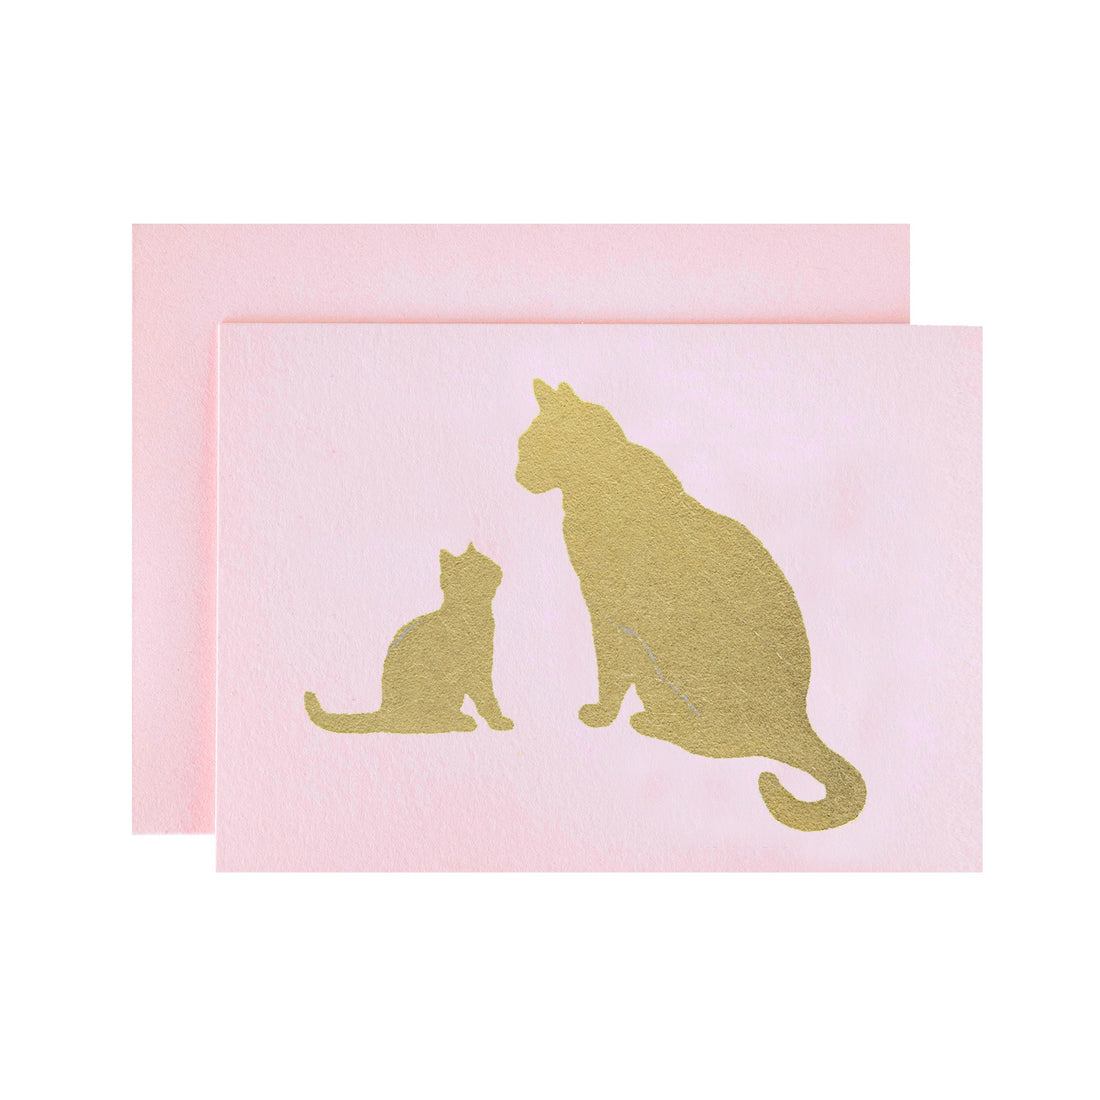 A light pink card featuring the silhouette of a cat and a kitten sitting together in solid gold leaf.